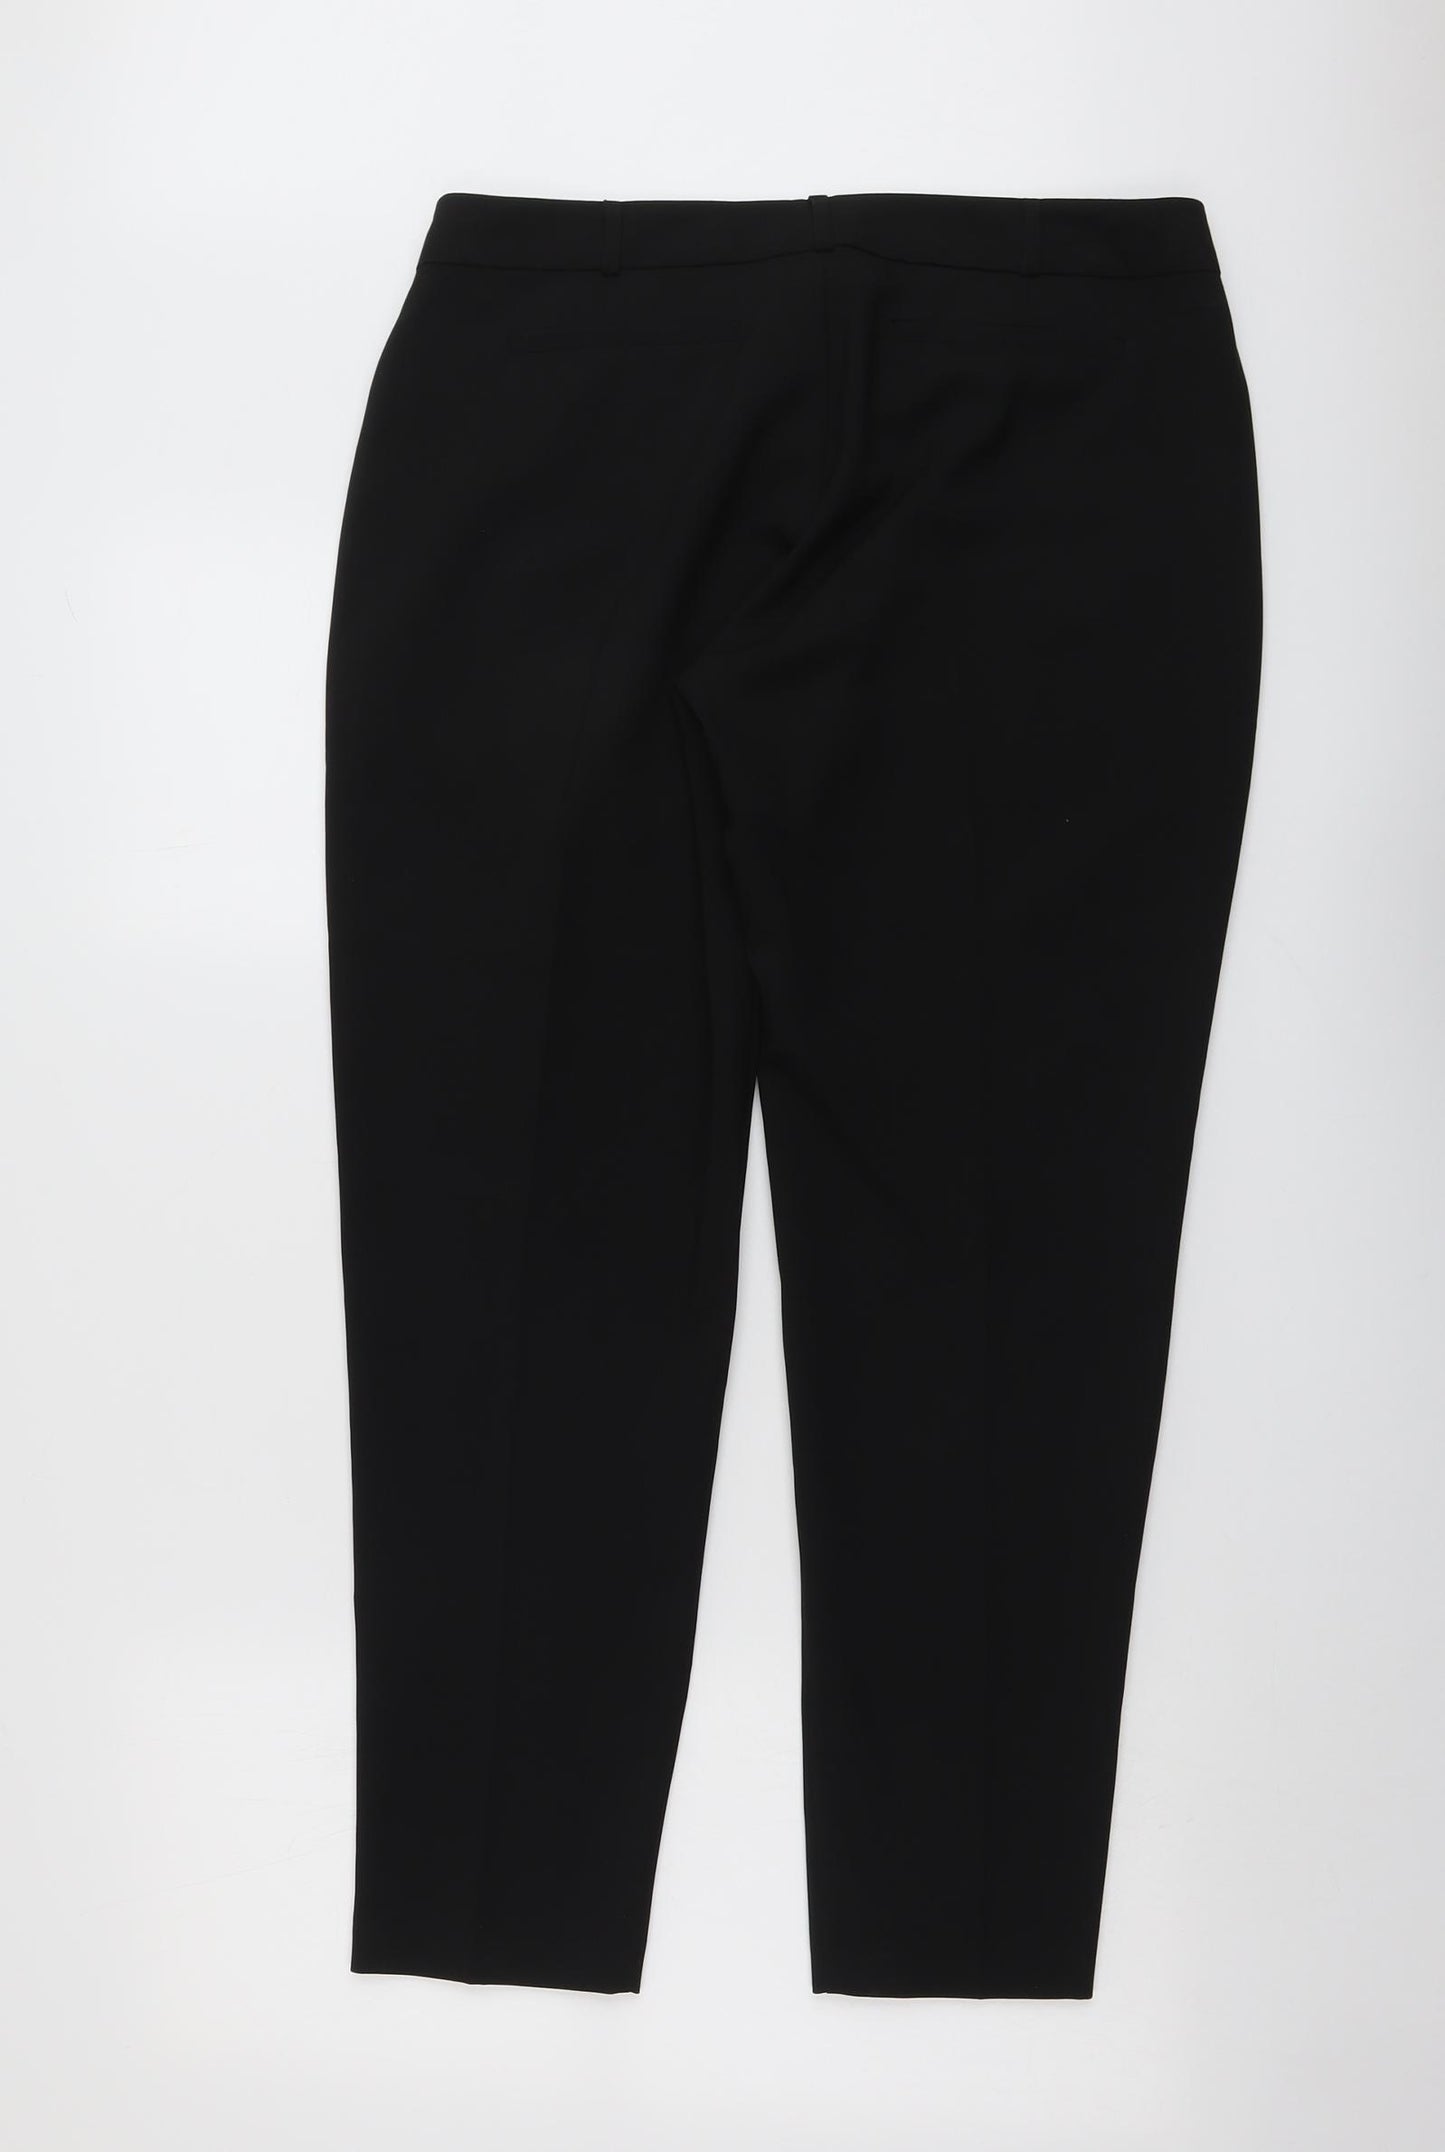 Select Womens Black Polyester Carrot Trousers Size 14 L28 in Regular Button